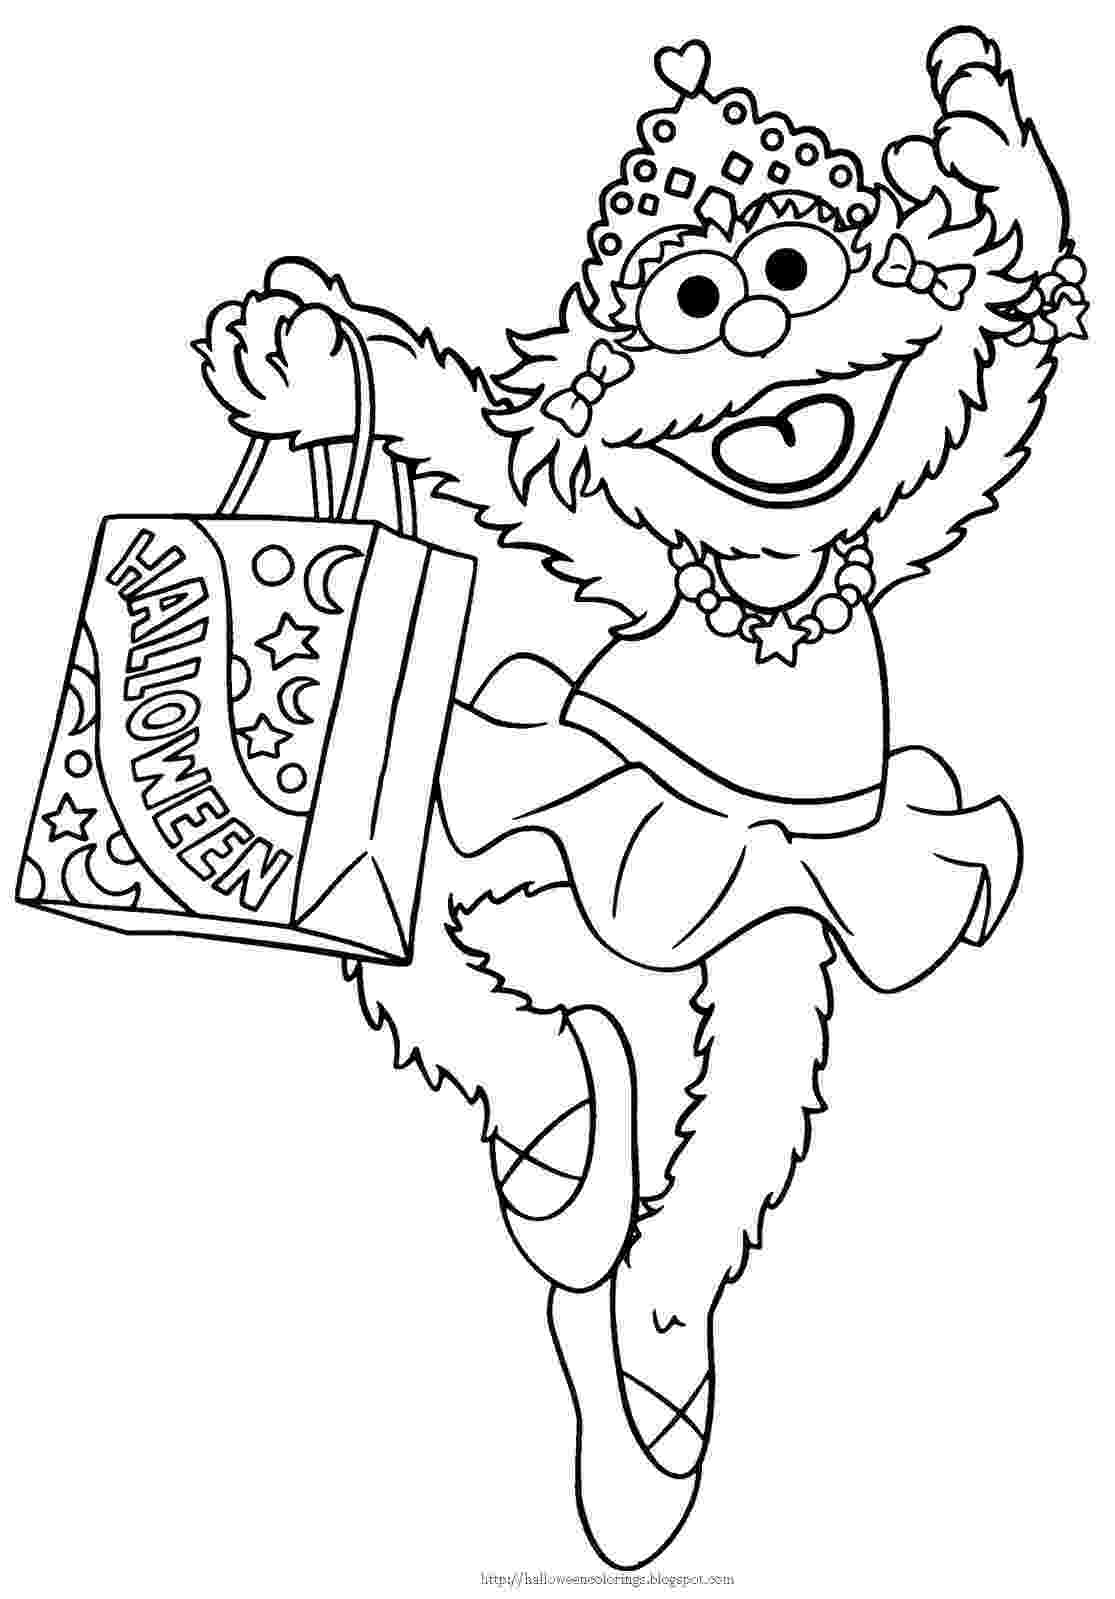 sesame street coloring pages cookie monster cookie jars and coloring pages on pinterest street pages coloring sesame 